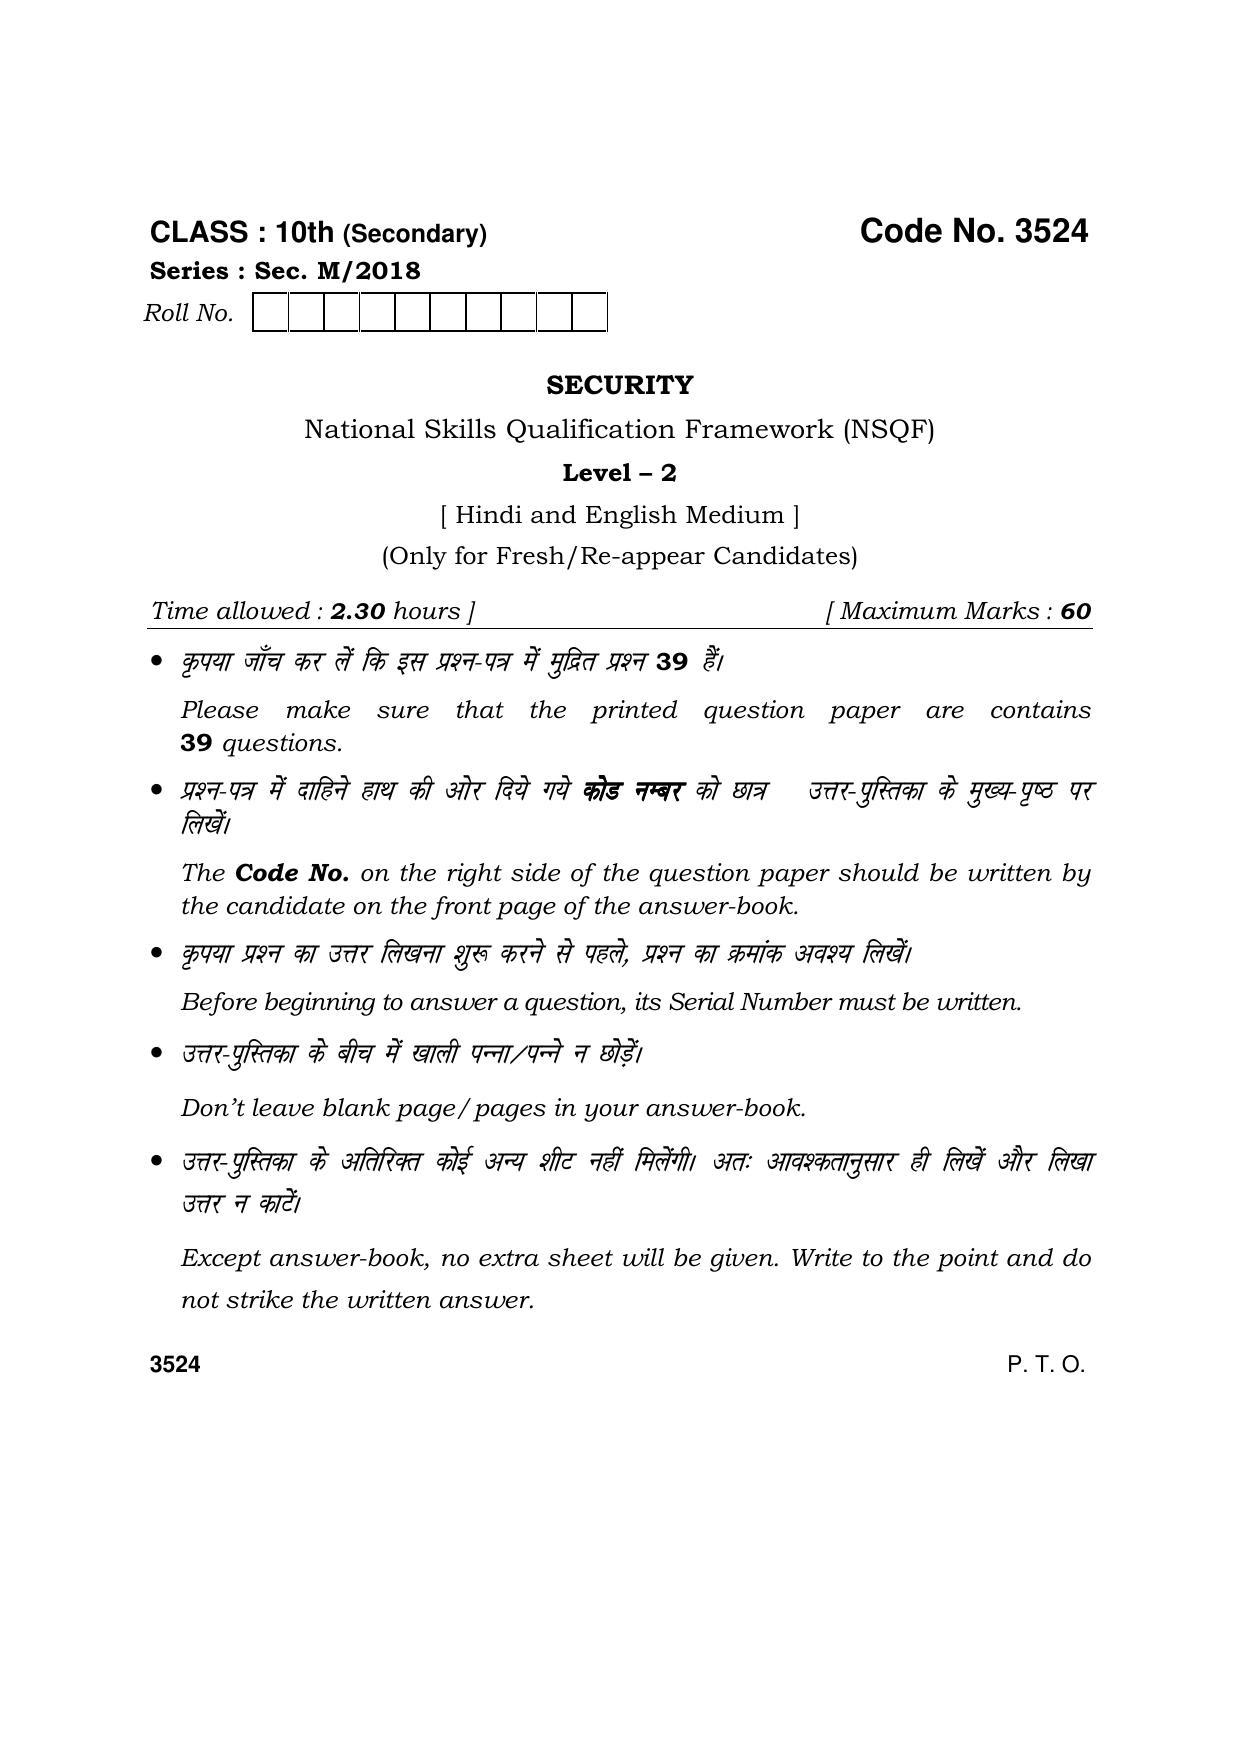 Haryana Board HBSE Class 10 Security 2018 Question Paper - Page 1